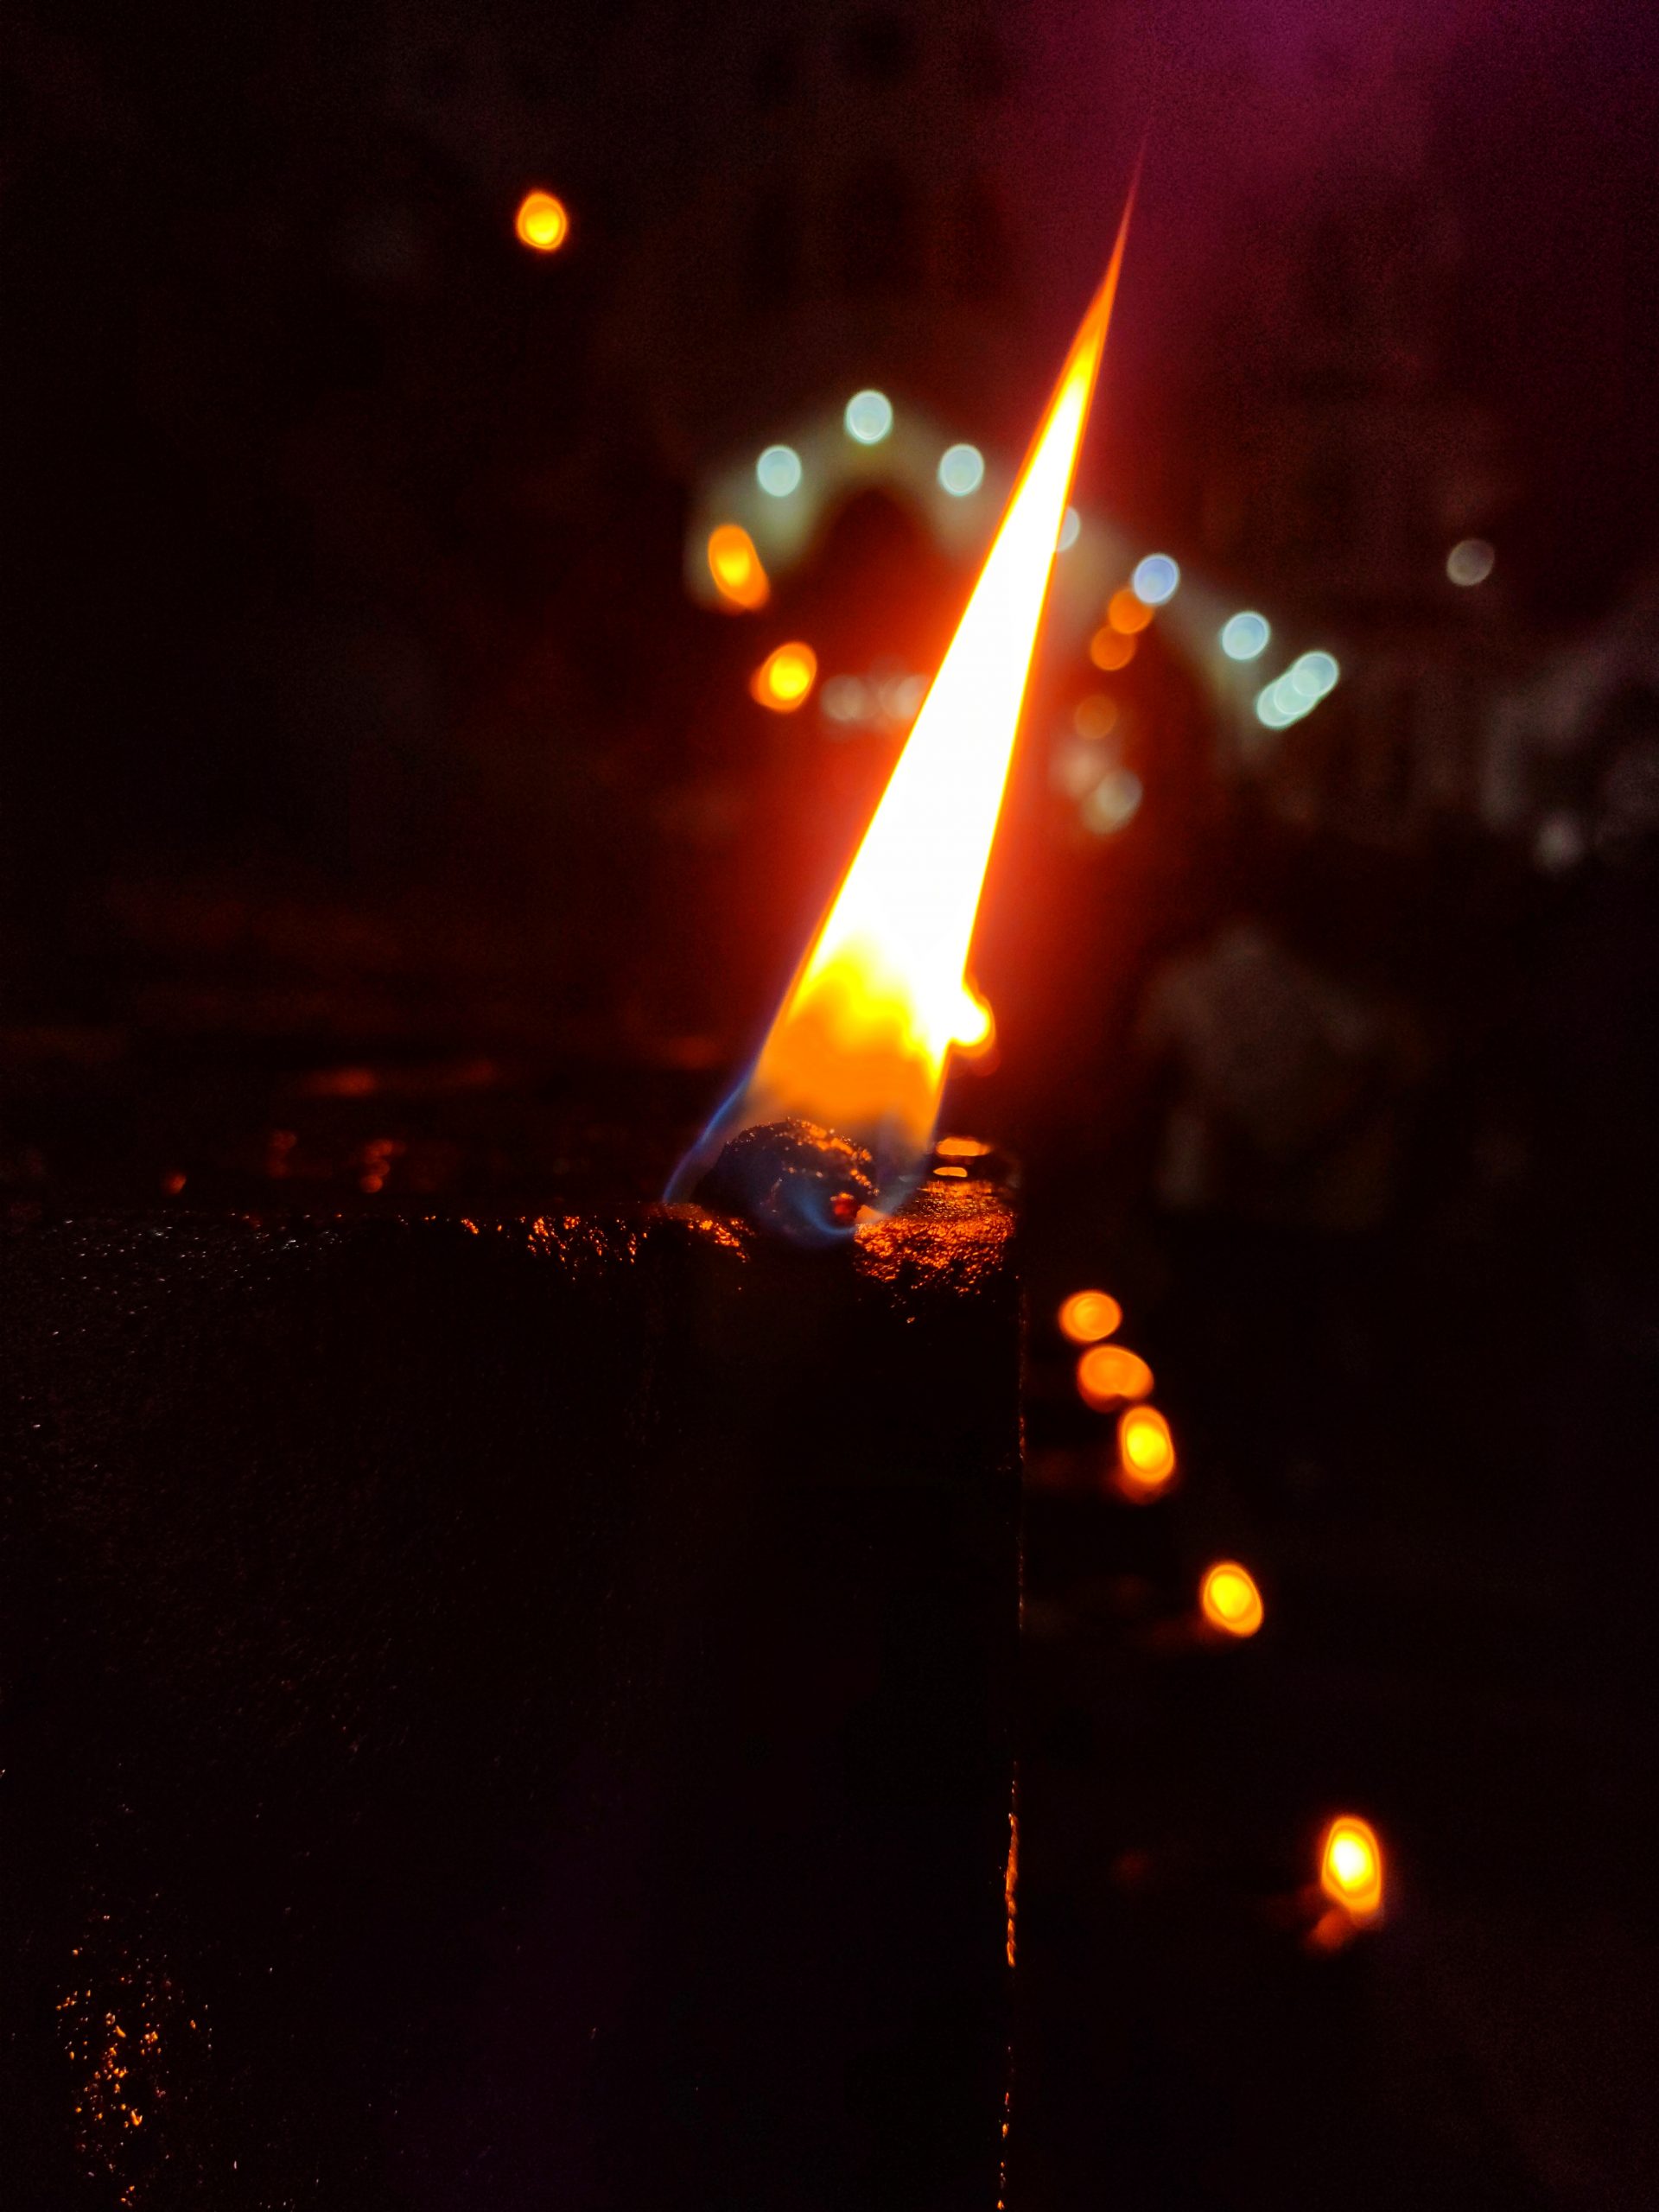 Flame of an oil lamp